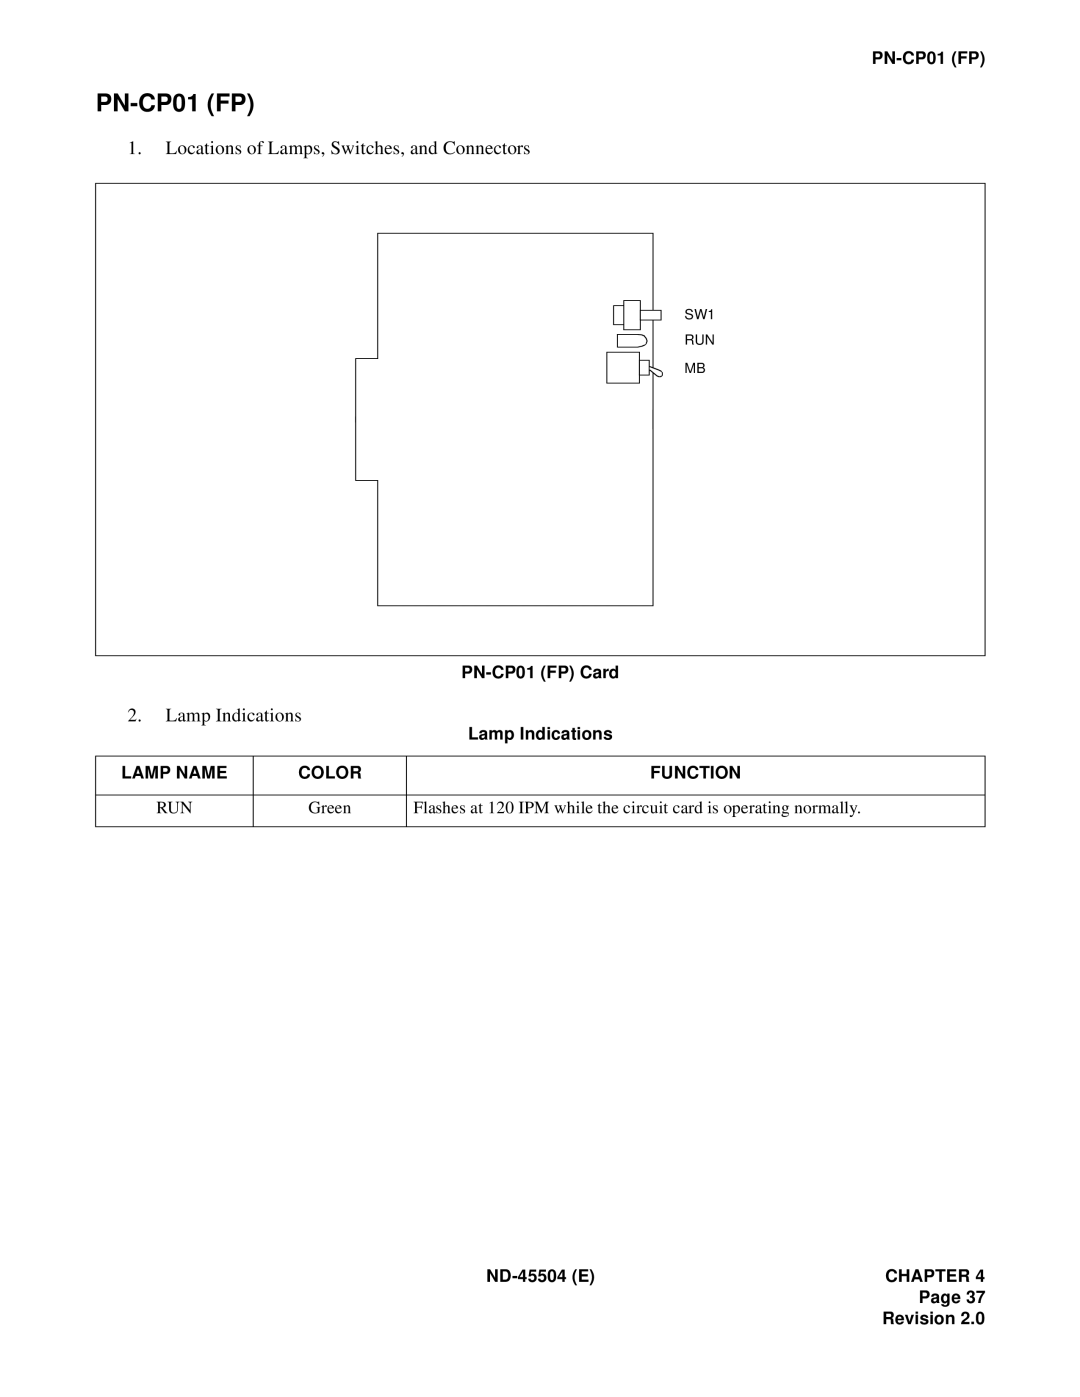 NEC 2000 IVS manual Locations of Lamps, Switches, and Connectors, Lamp Indications, PN-CP01FP Card, Lamp Name, Color 